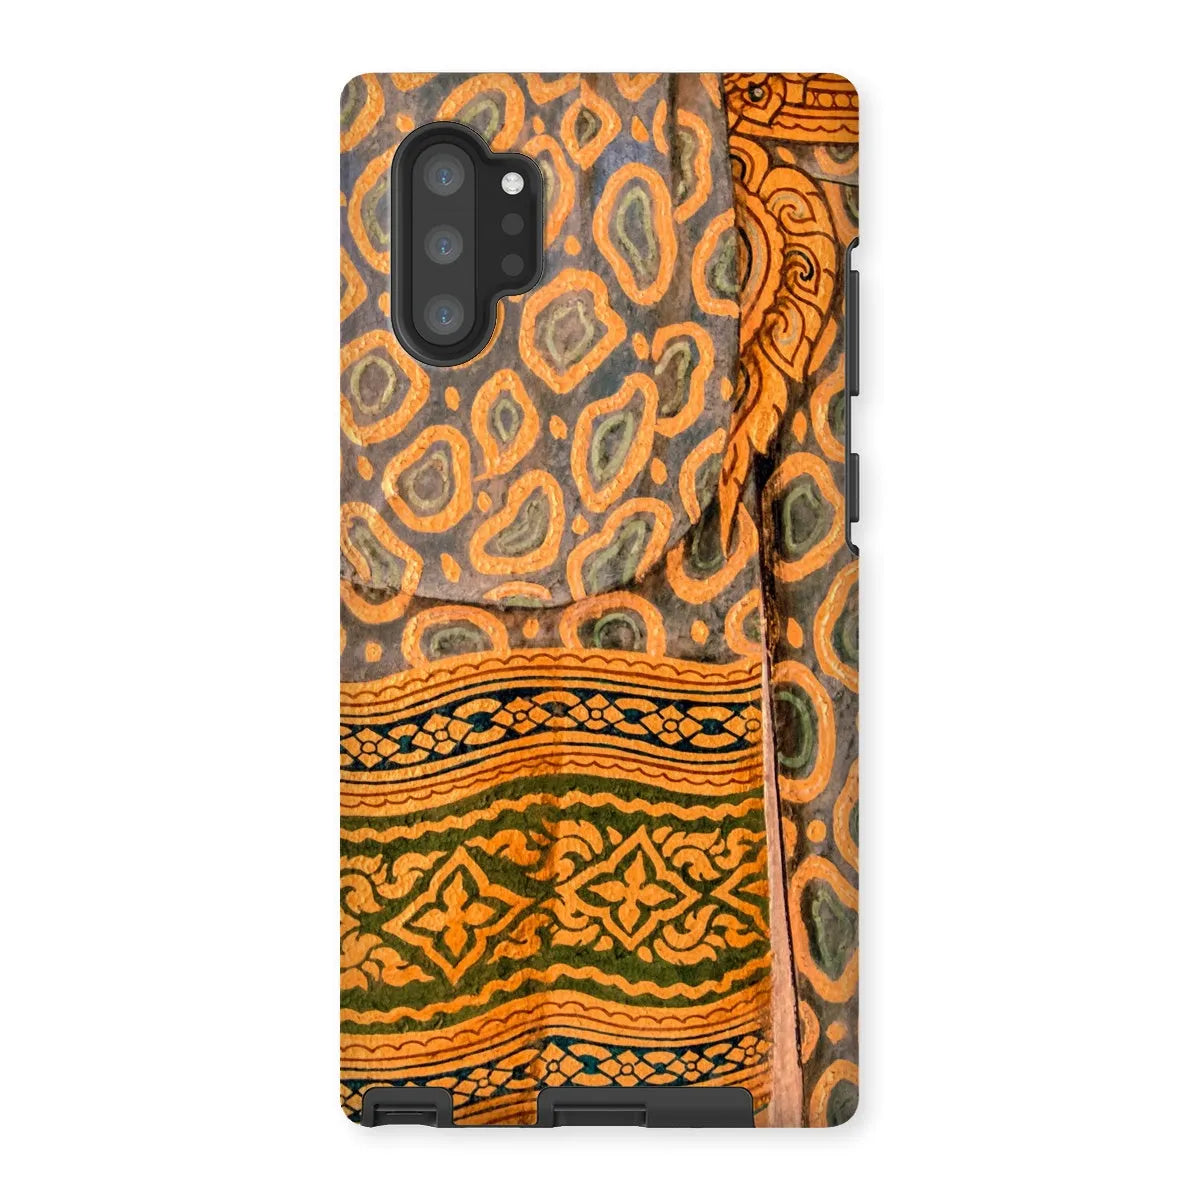 Lady In Waiting - Thai Aesthetic Art Phone Case - Samsung Galaxy Note 10p / Matte - Mobile Phone Cases - Aesthetic Art